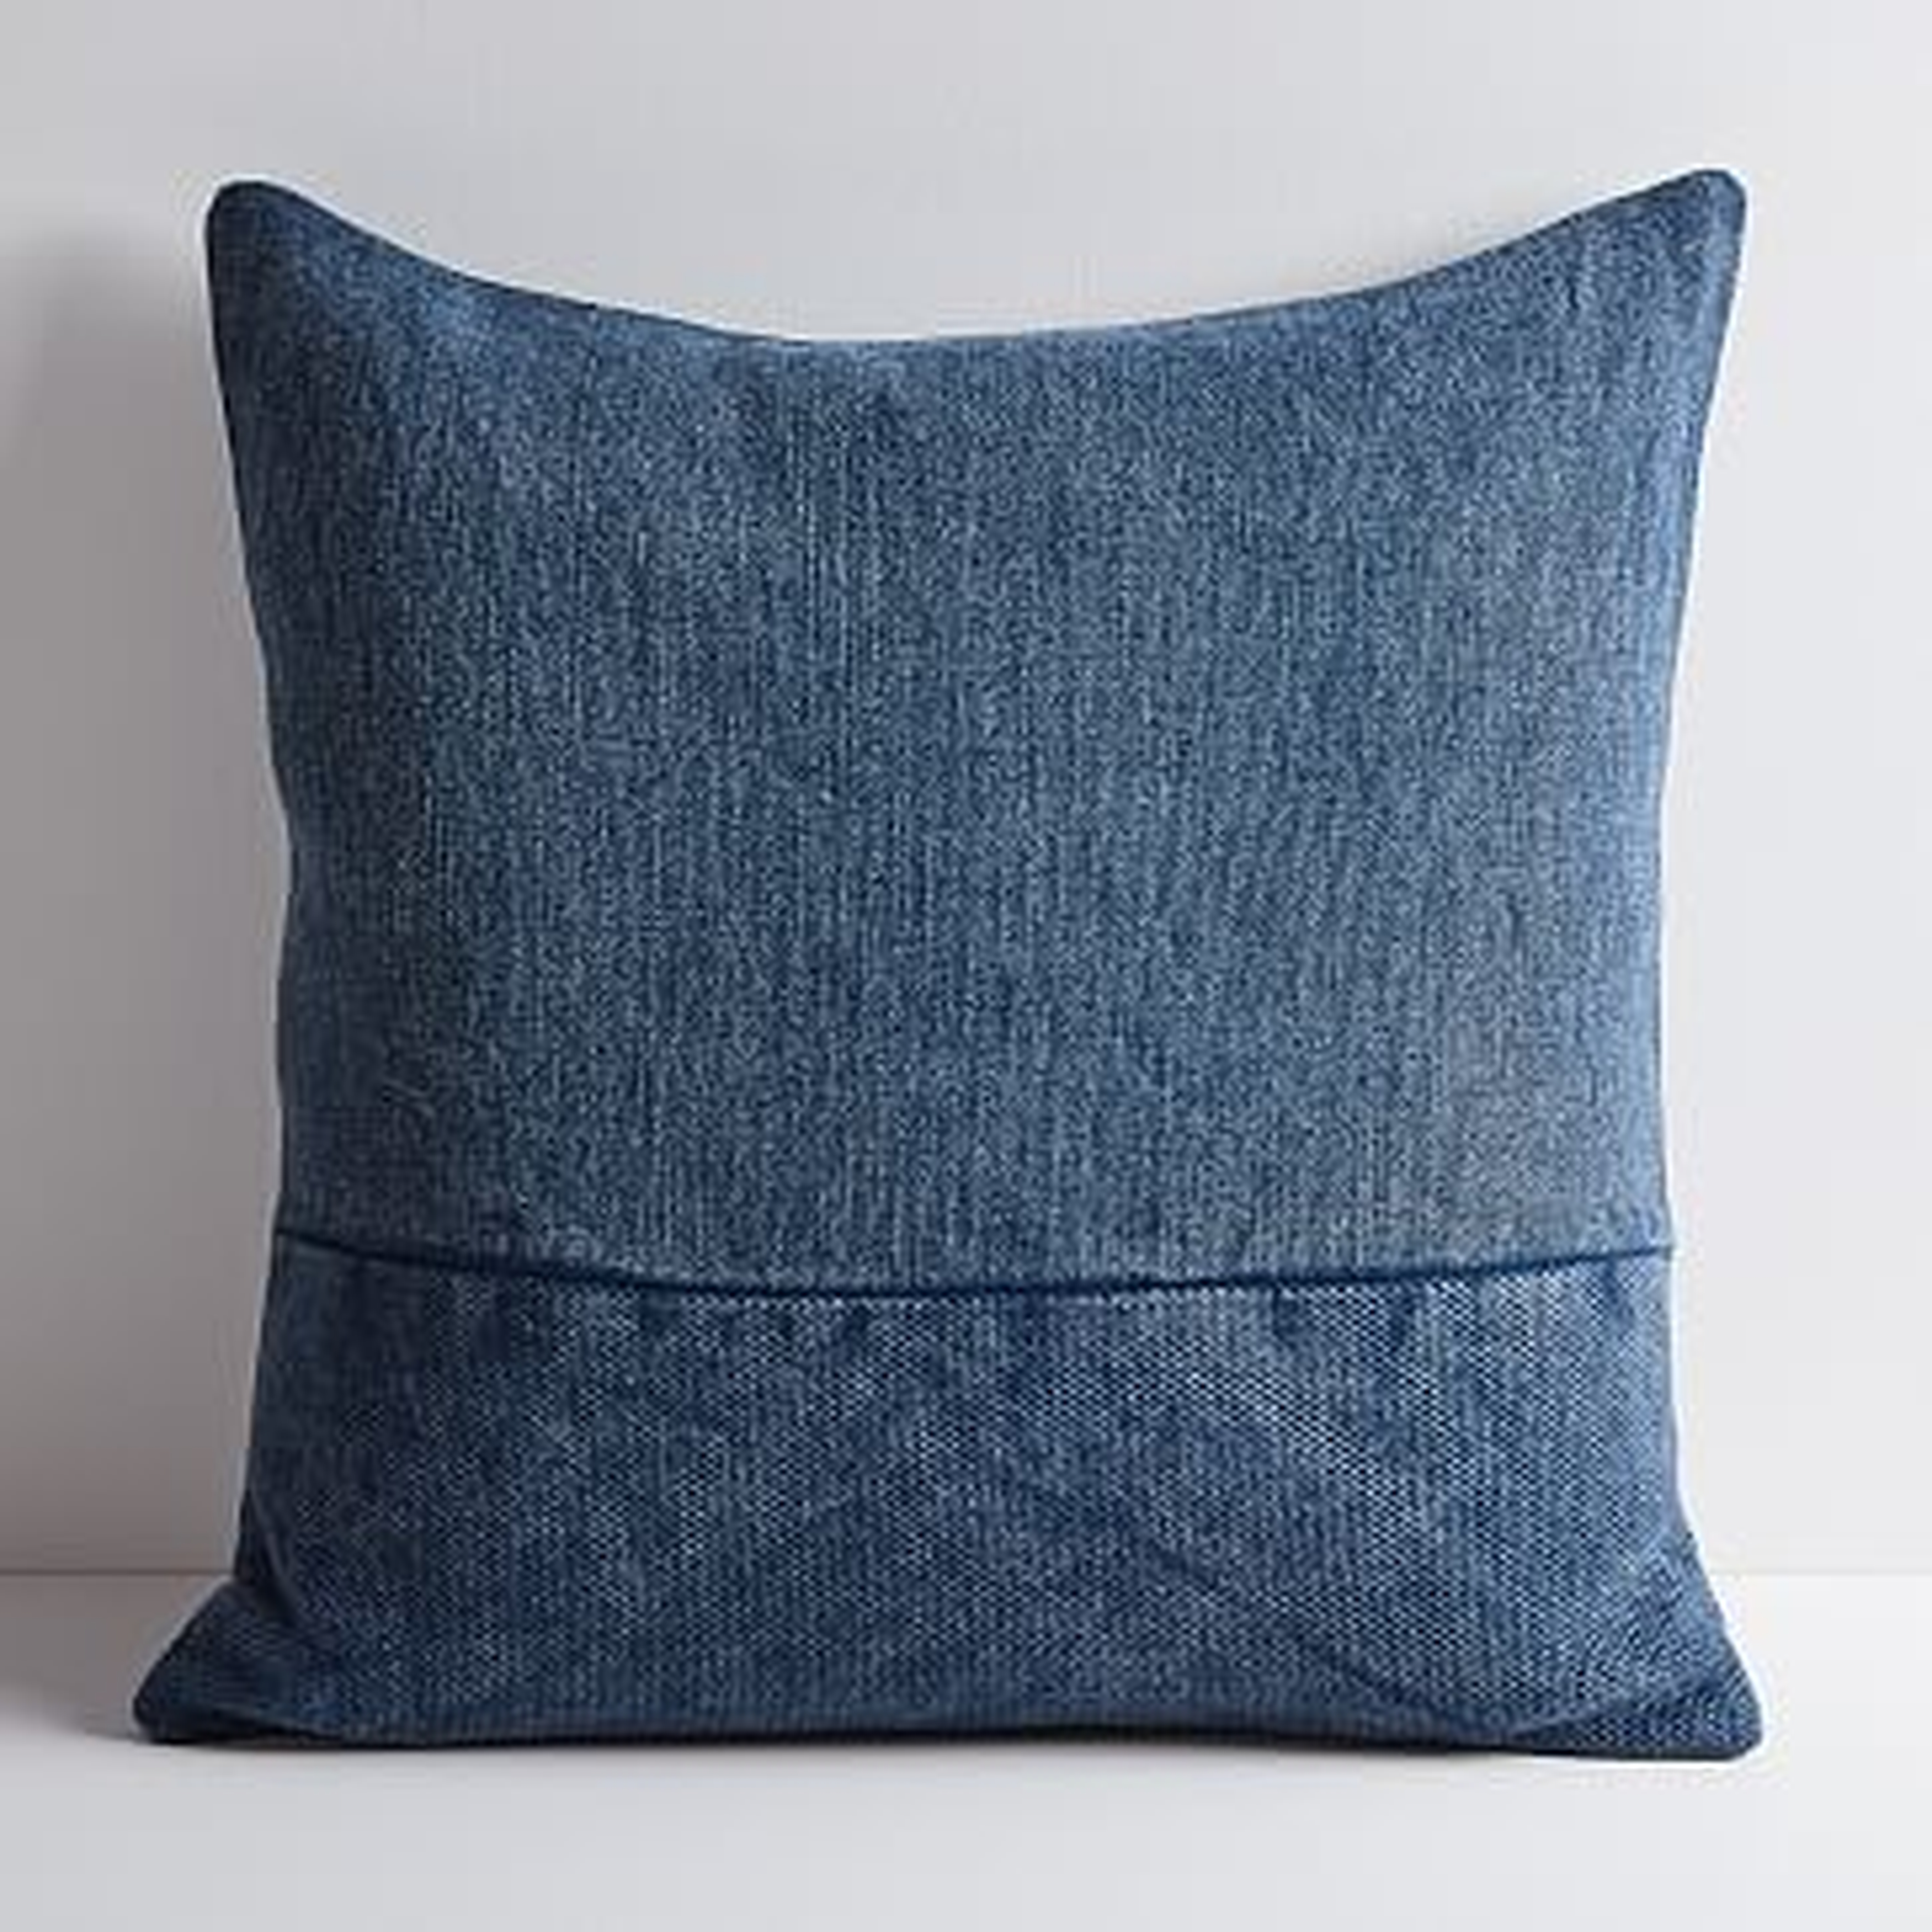 Cotton Canvas Pillow Cover, 24"sq, Midnight - West Elm